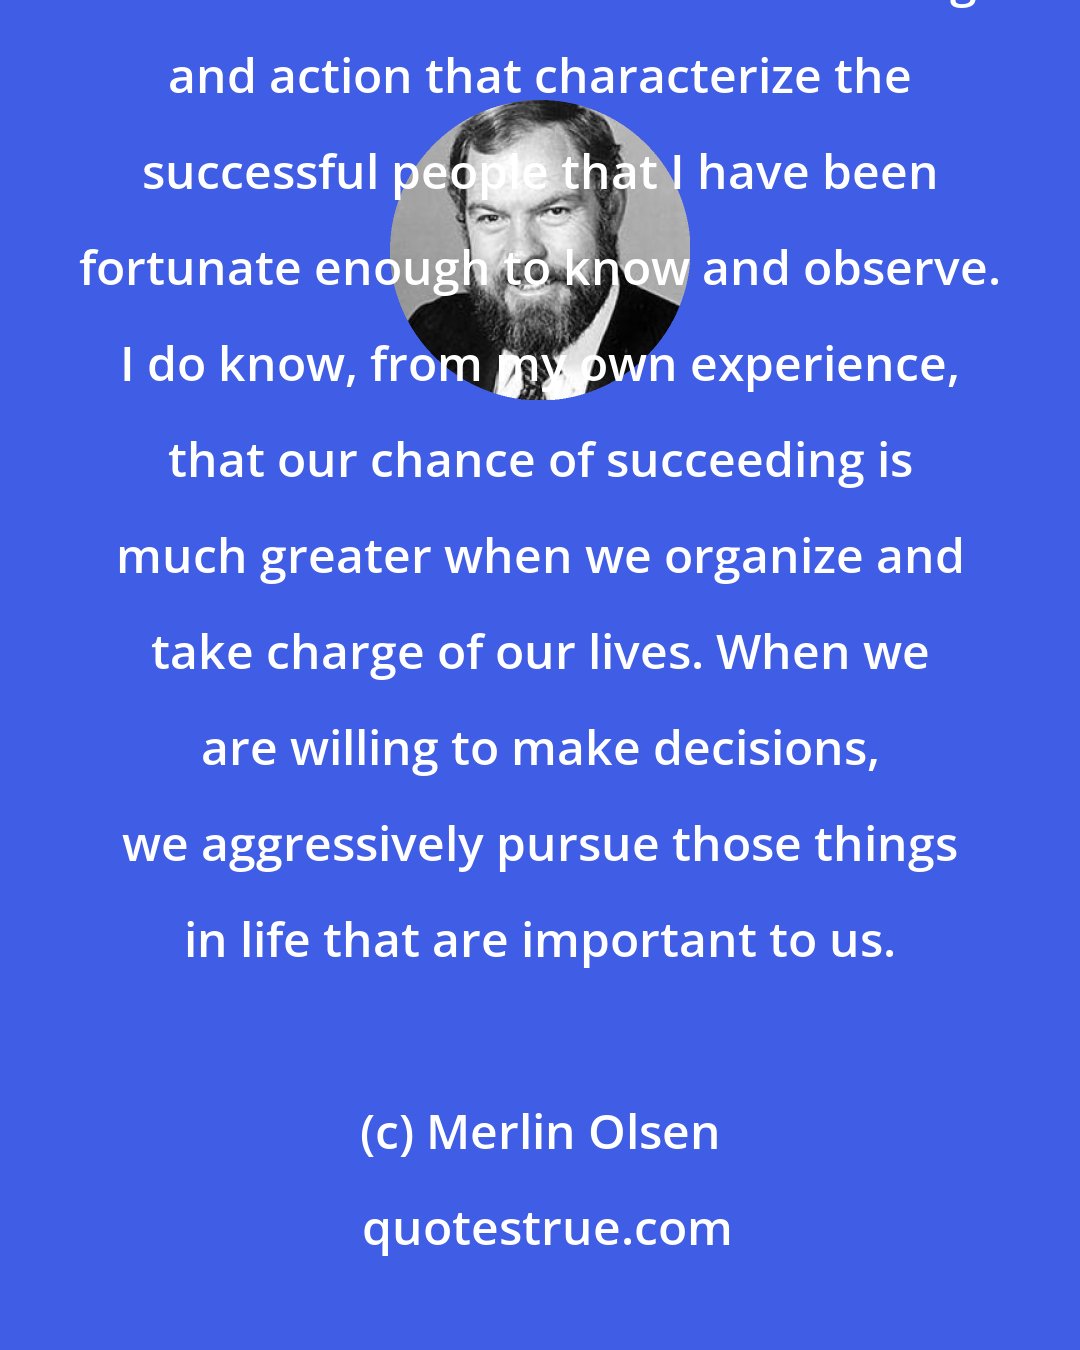 Merlin Olsen: I do not believe that there is any secret or single formula for success, but there are common threads of thought and action that characterize the successful people that I have been fortunate enough to know and observe. I do know, from my own experience, that our chance of succeeding is much greater when we organize and take charge of our lives. When we are willing to make decisions, we aggressively pursue those things in life that are important to us.